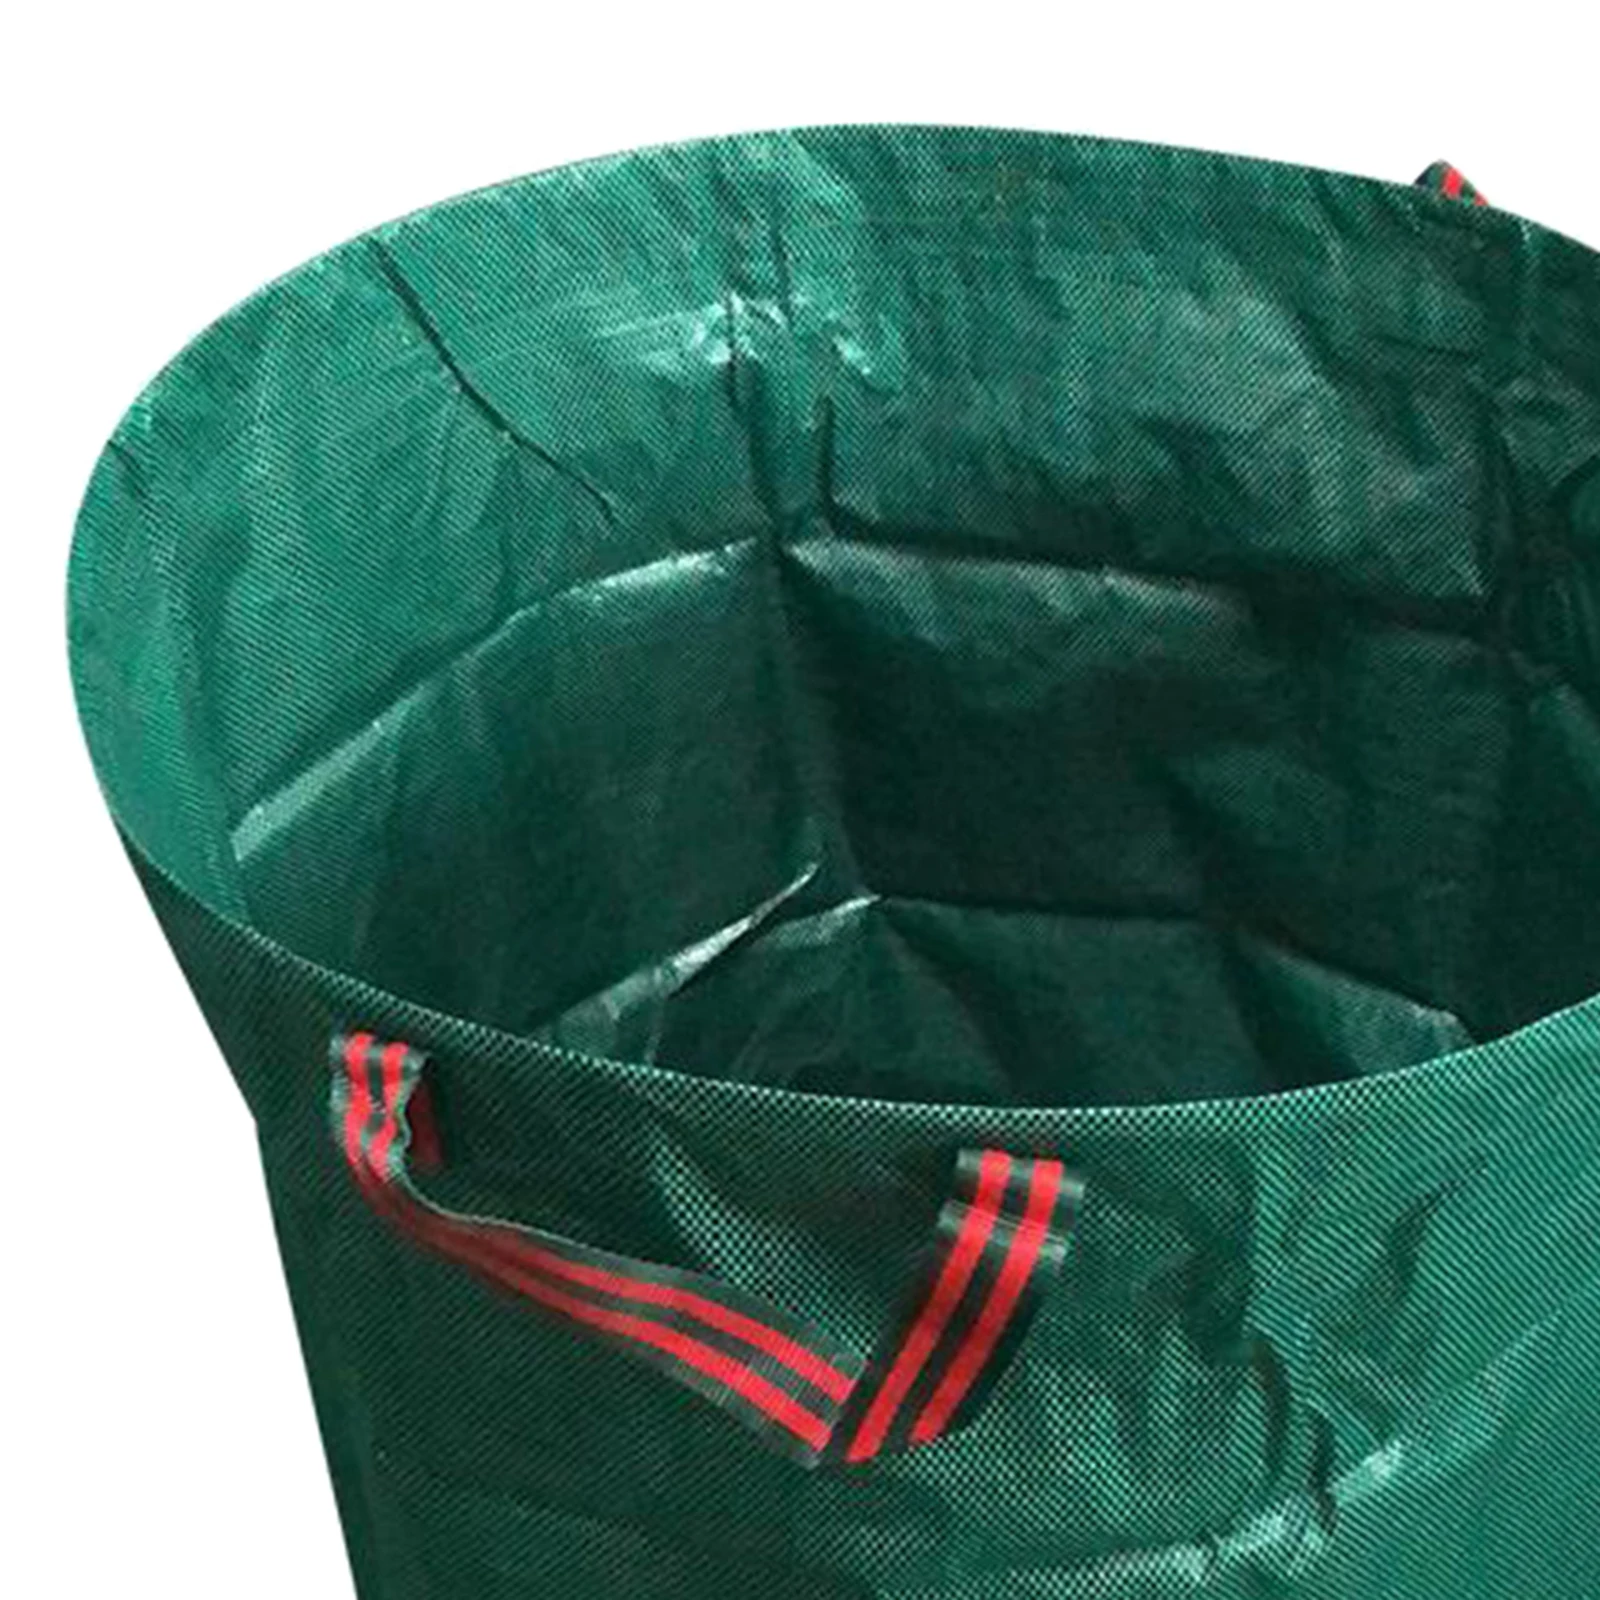 https://ae01.alicdn.com/kf/S03bcec3f514a480eb8d530821c320d55k/Fallen-Leaves-Container-Garden-Yard-Waste-Leaves-Trash-Bag-Reusable-Garbage-Container-Bags-Garbage-Waste-Collection.jpg